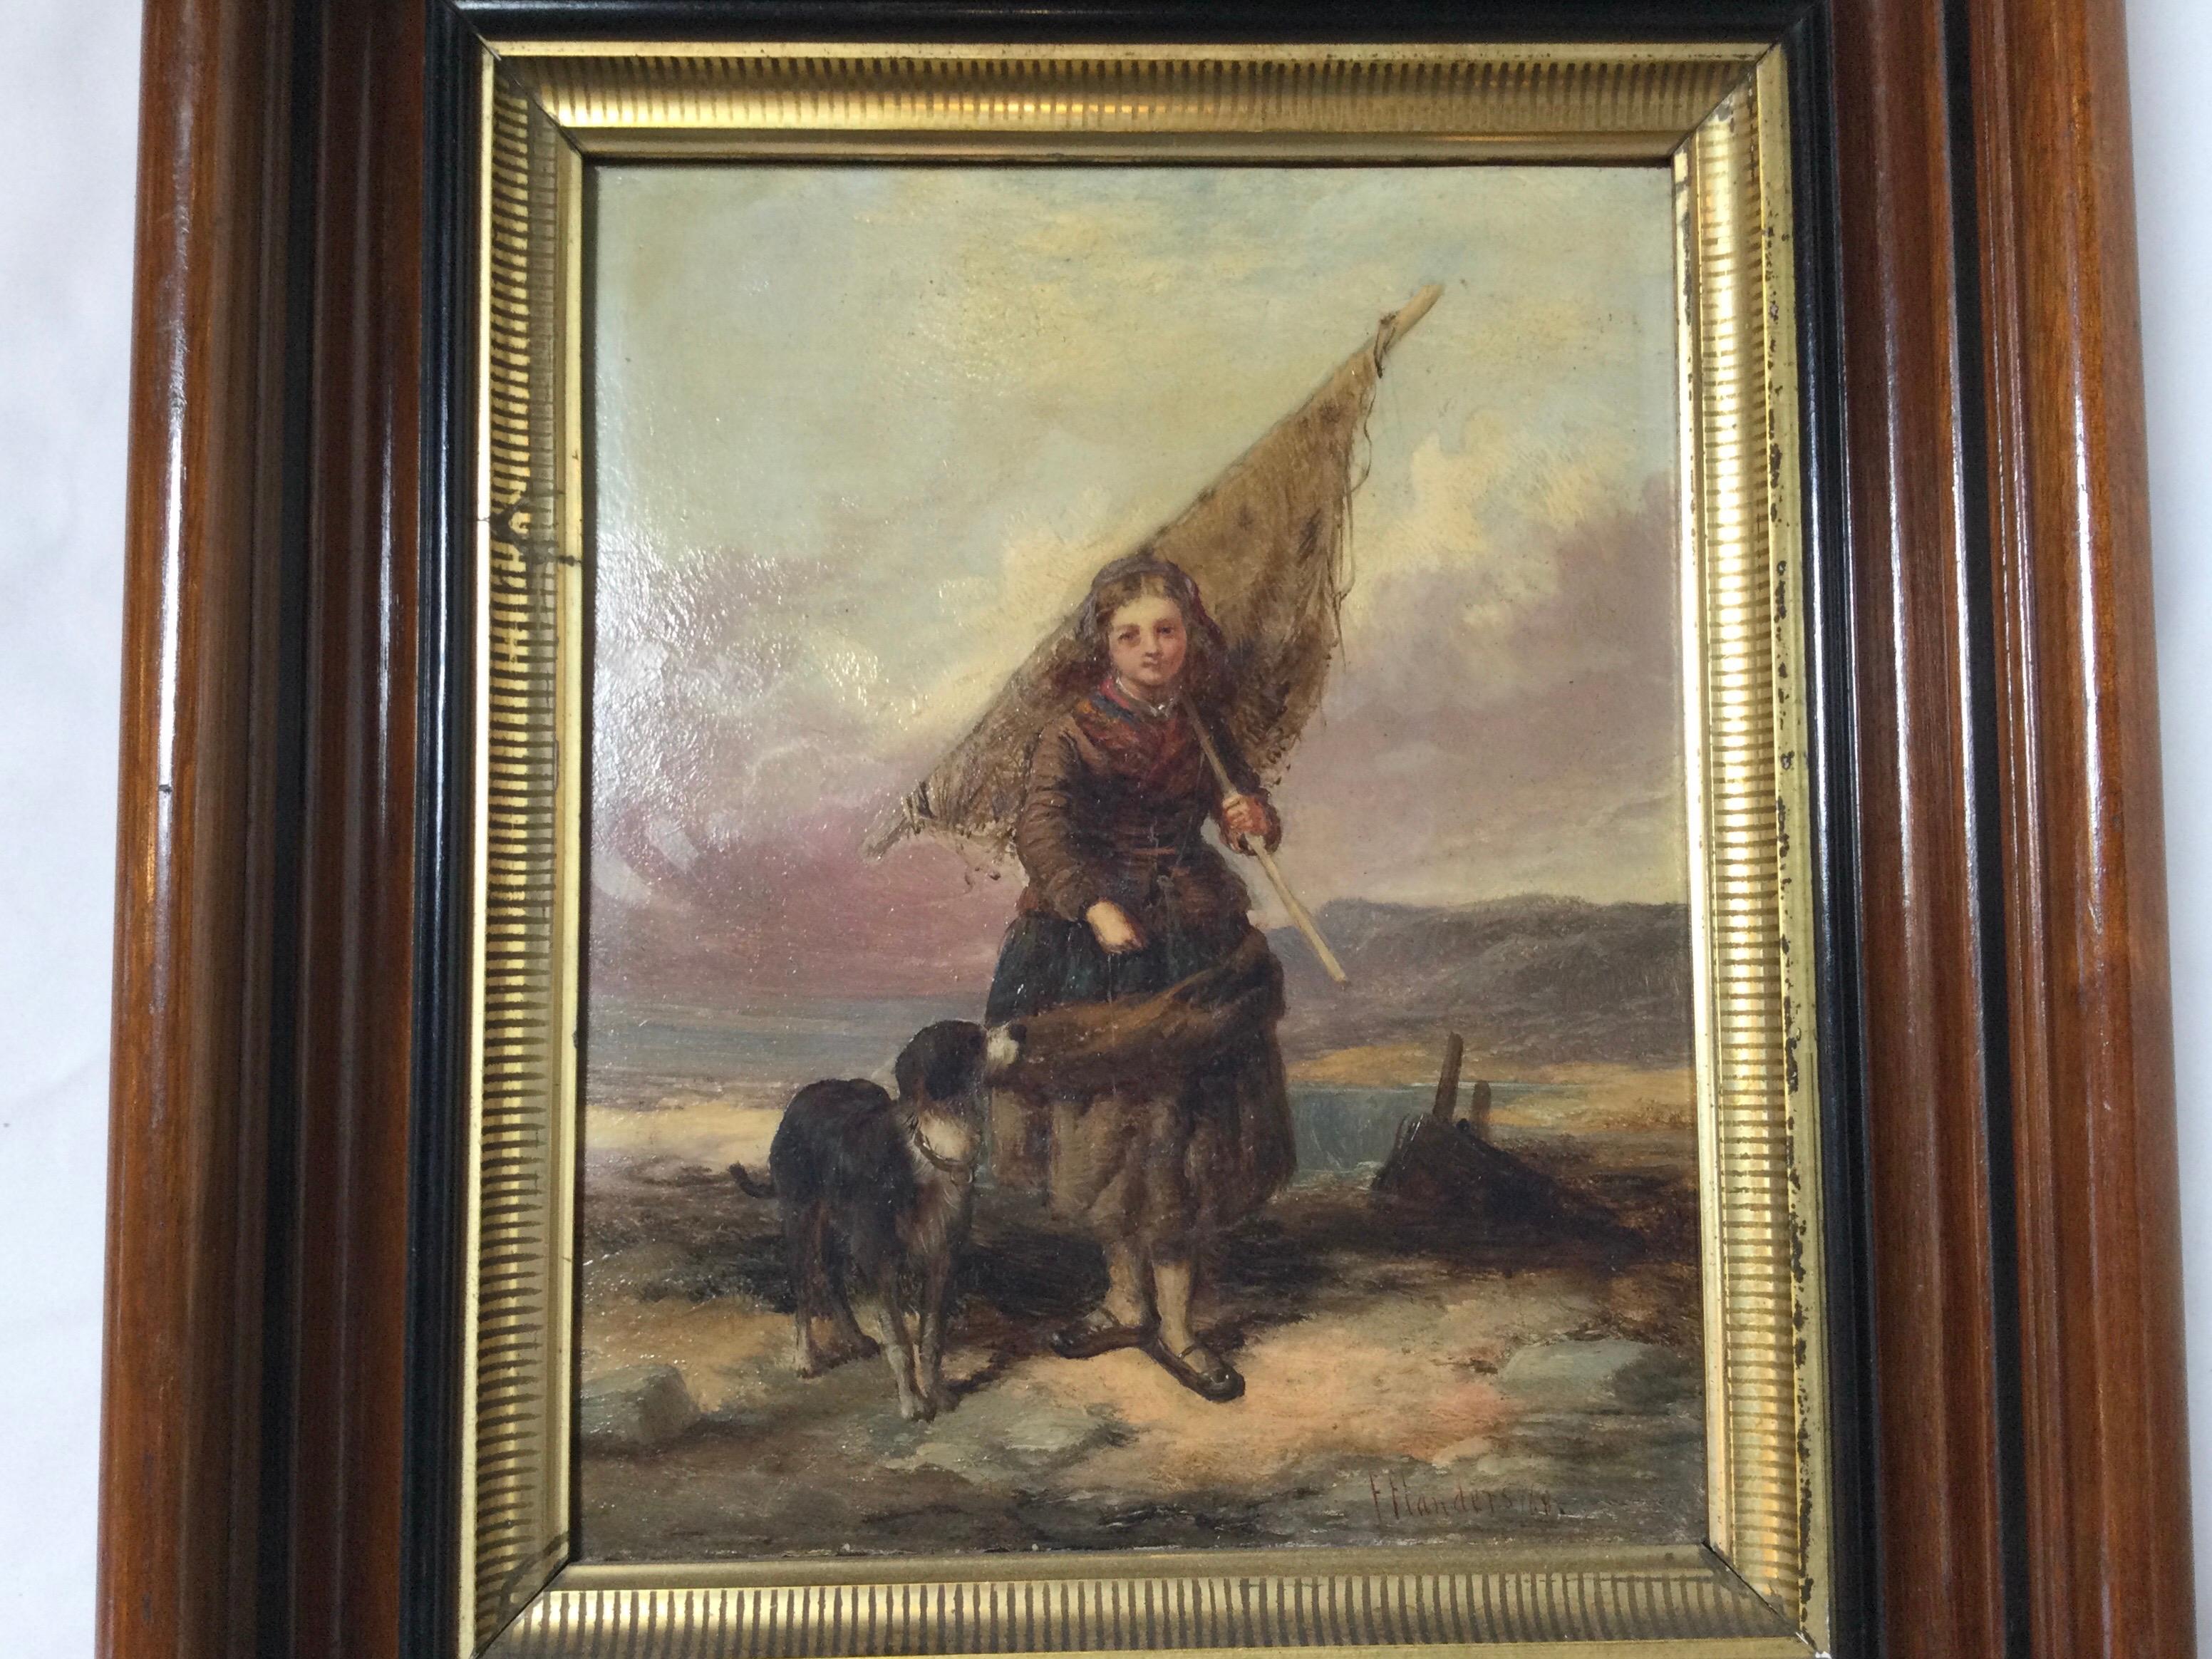 Charming oil painting of a you village girl with dog. The original walnut frame with gilt liner with ebonized striping all around. The painting is signed in the lower corner F. Flanders and painted in 1868. The back of the artist board, labeled Geo.